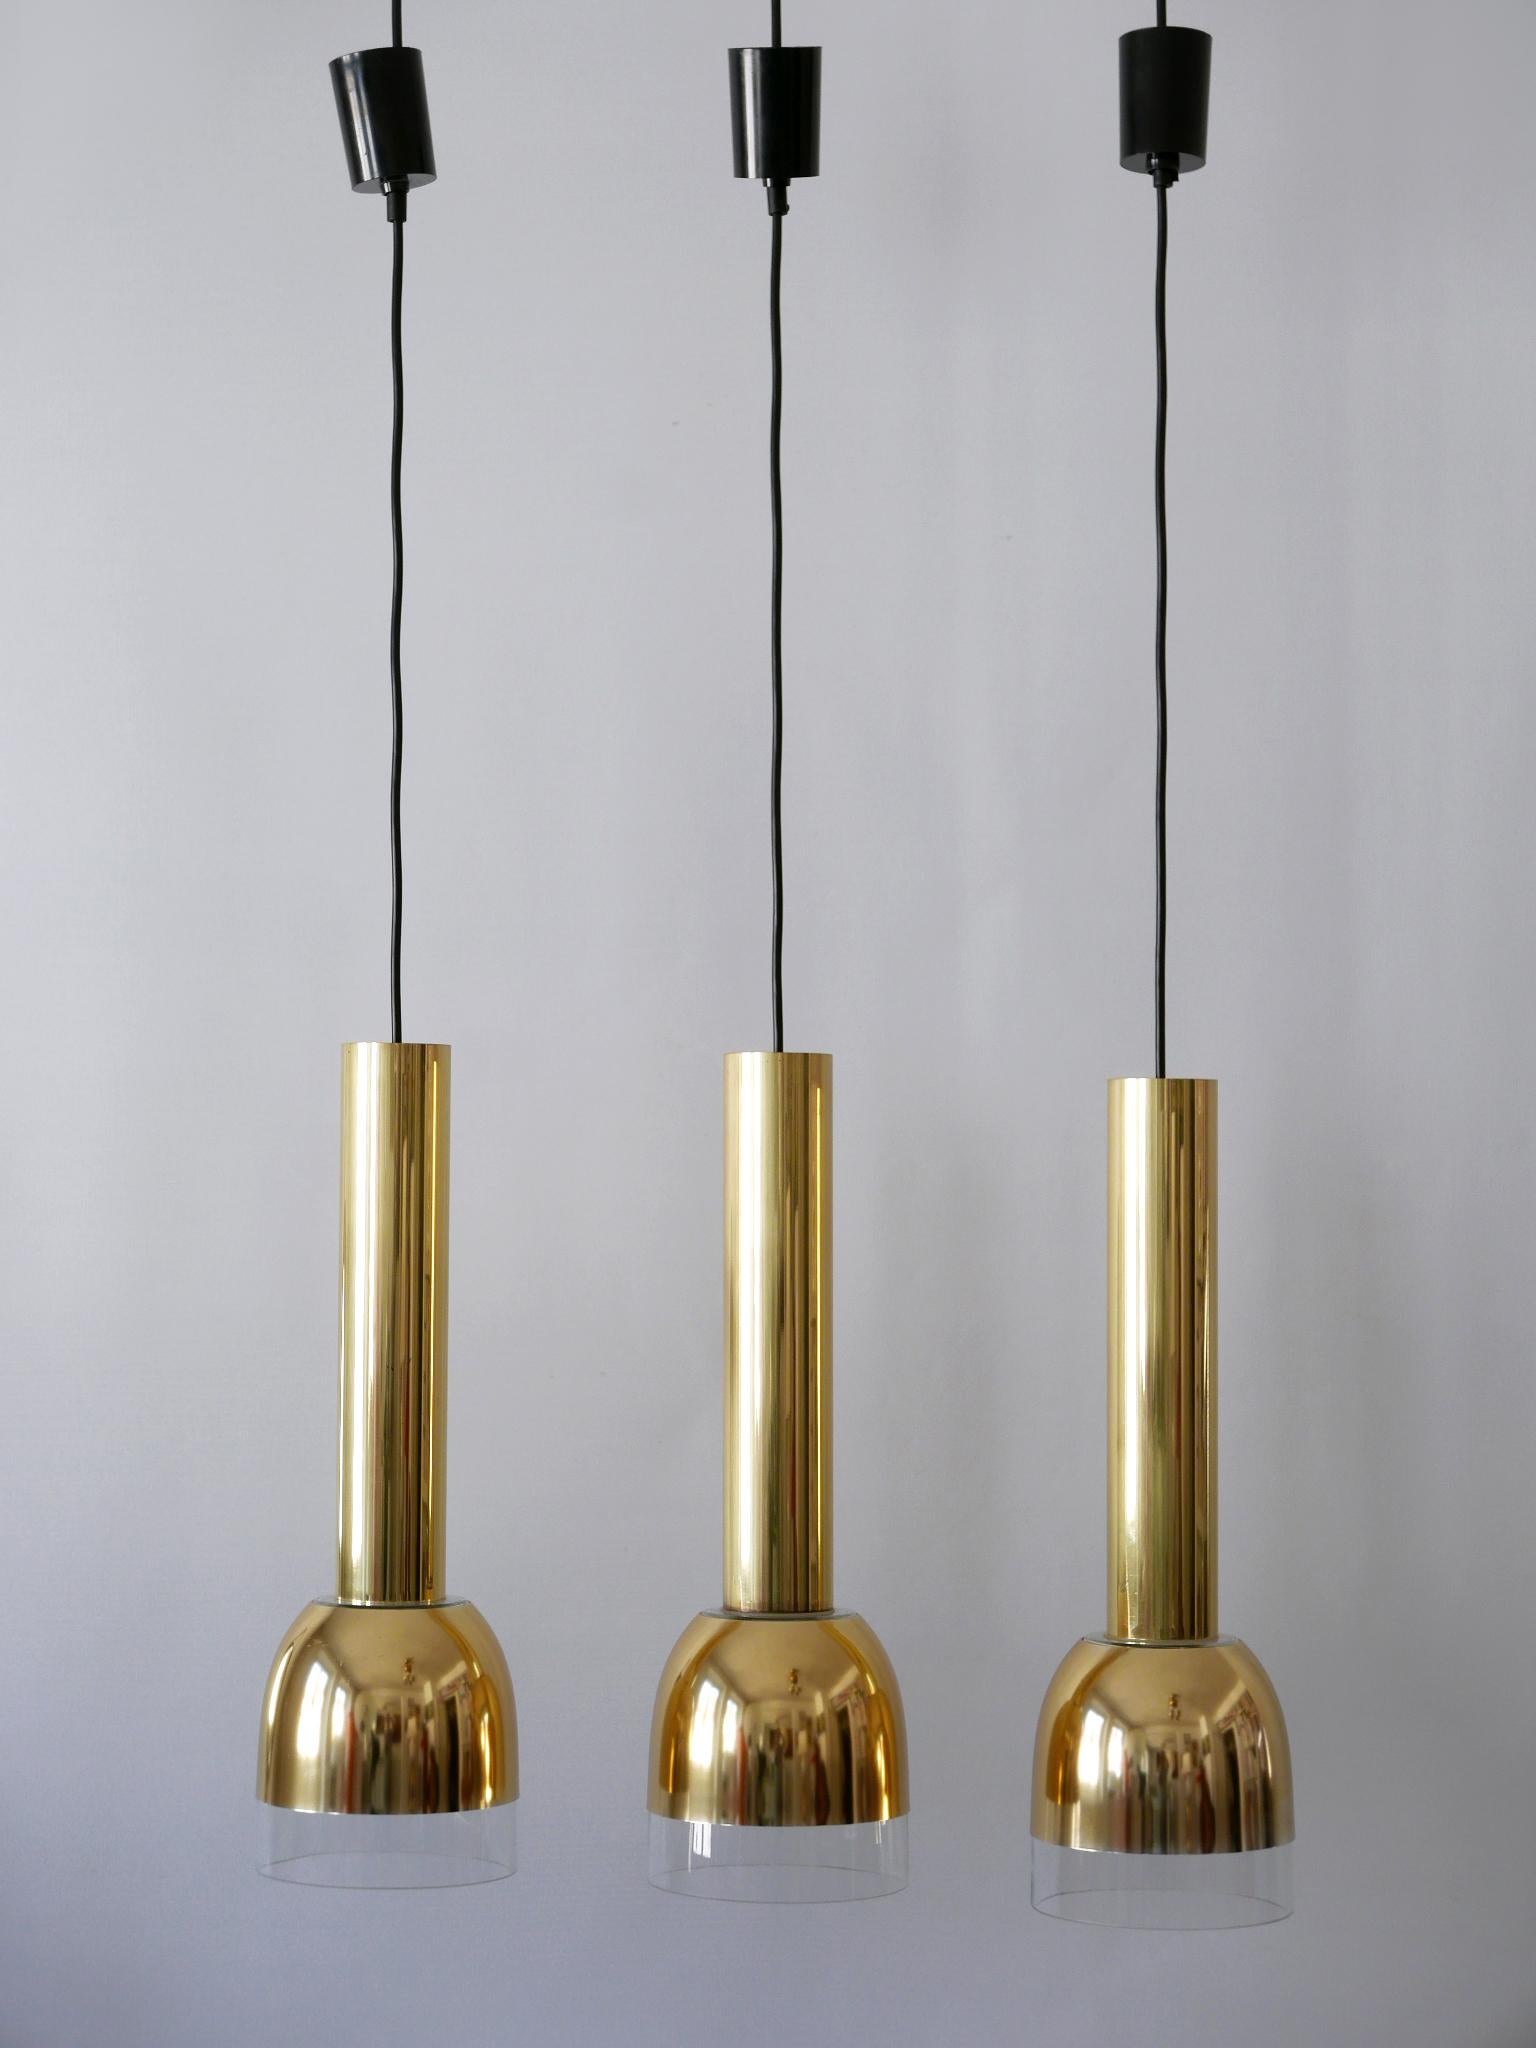 Anodized Set of Three Mid-Century Modern Pendant Lamps by Glashütte Limburg Germany 1970s For Sale